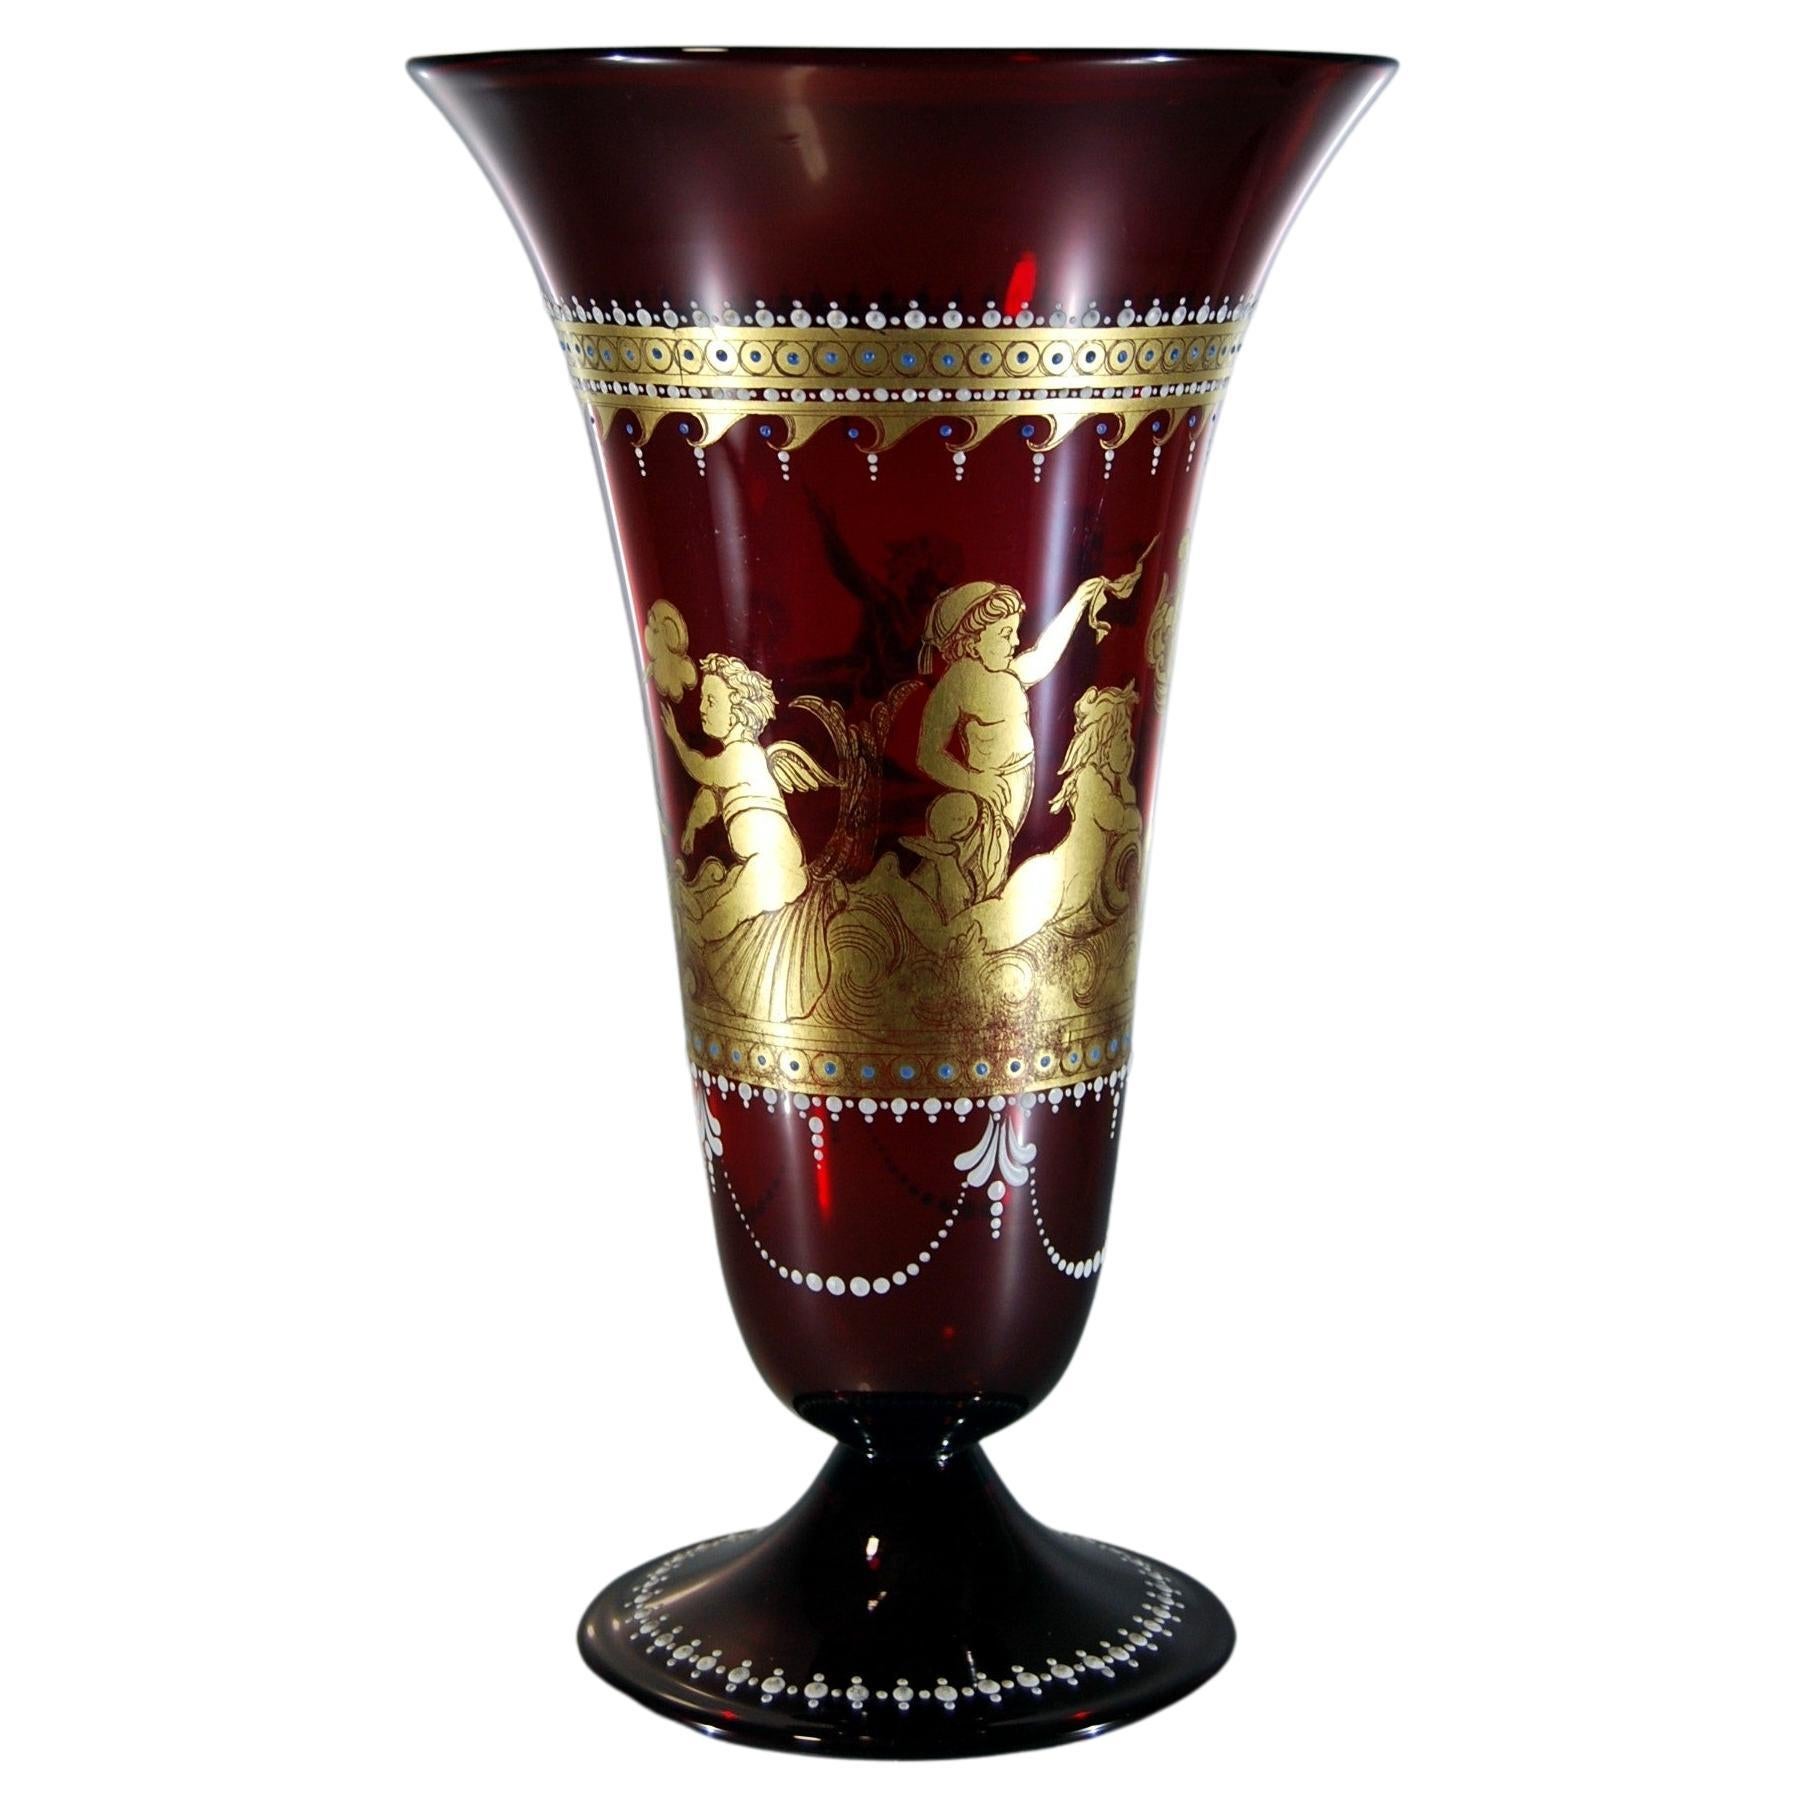 Venetian Glass Cornet Vase with Antique Gilt Decoration Engraved with Putti